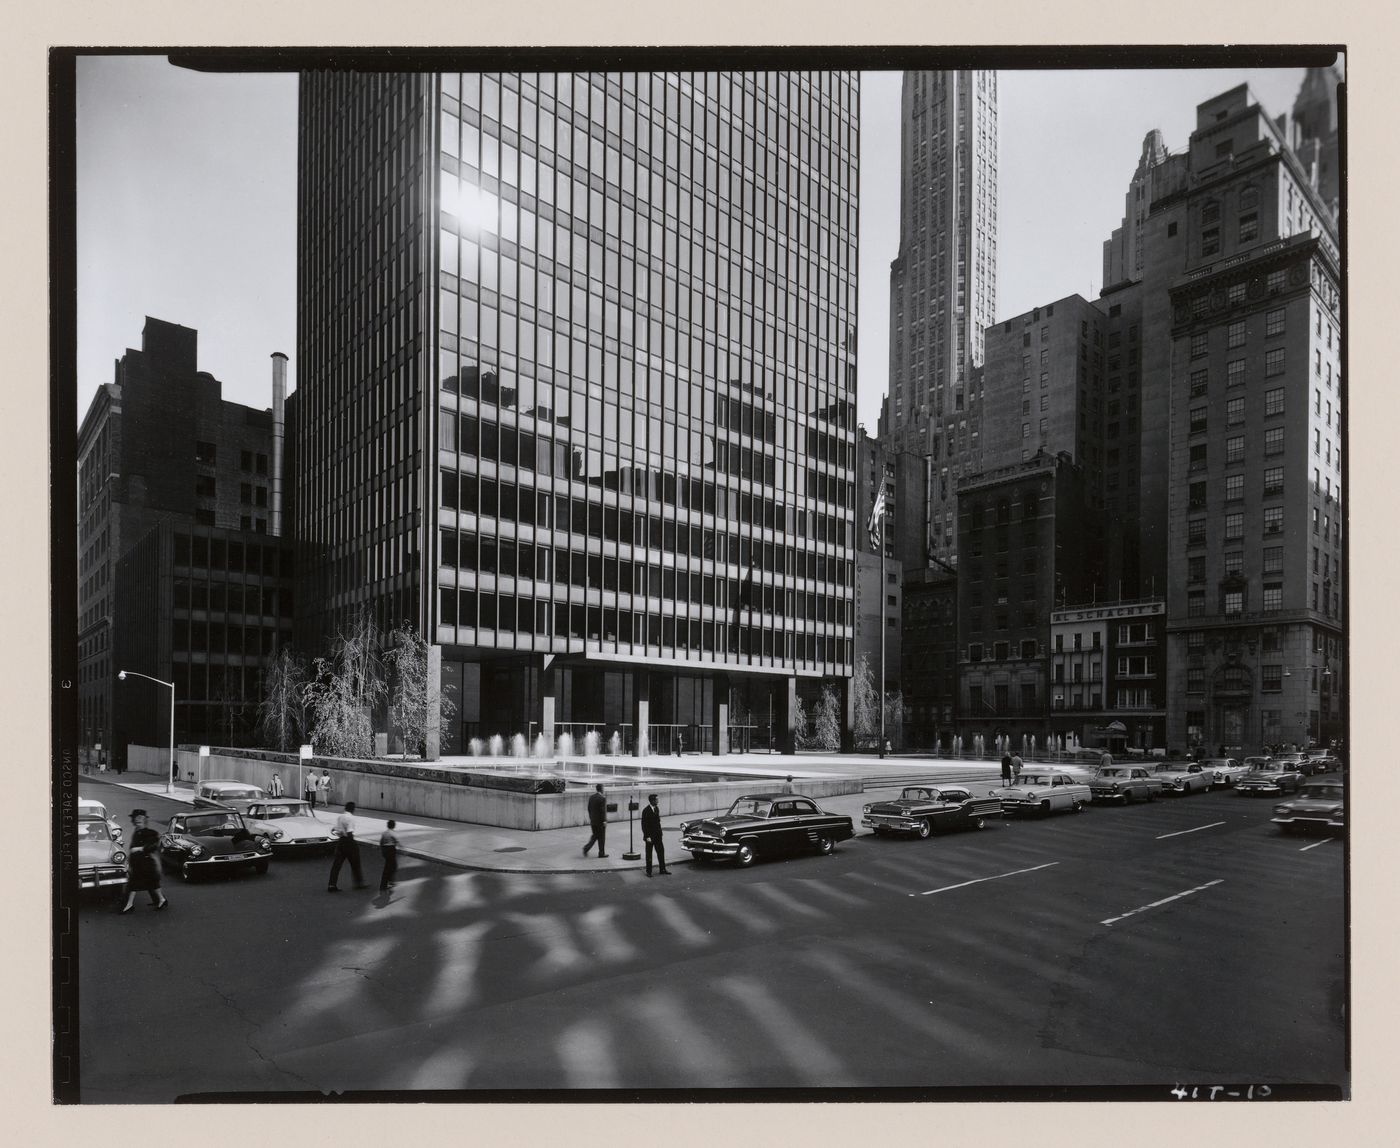 Partial view of the west façade and plaza of the Seagram Building from across the street showing the surrounding buildings reflected in the windows, New York City